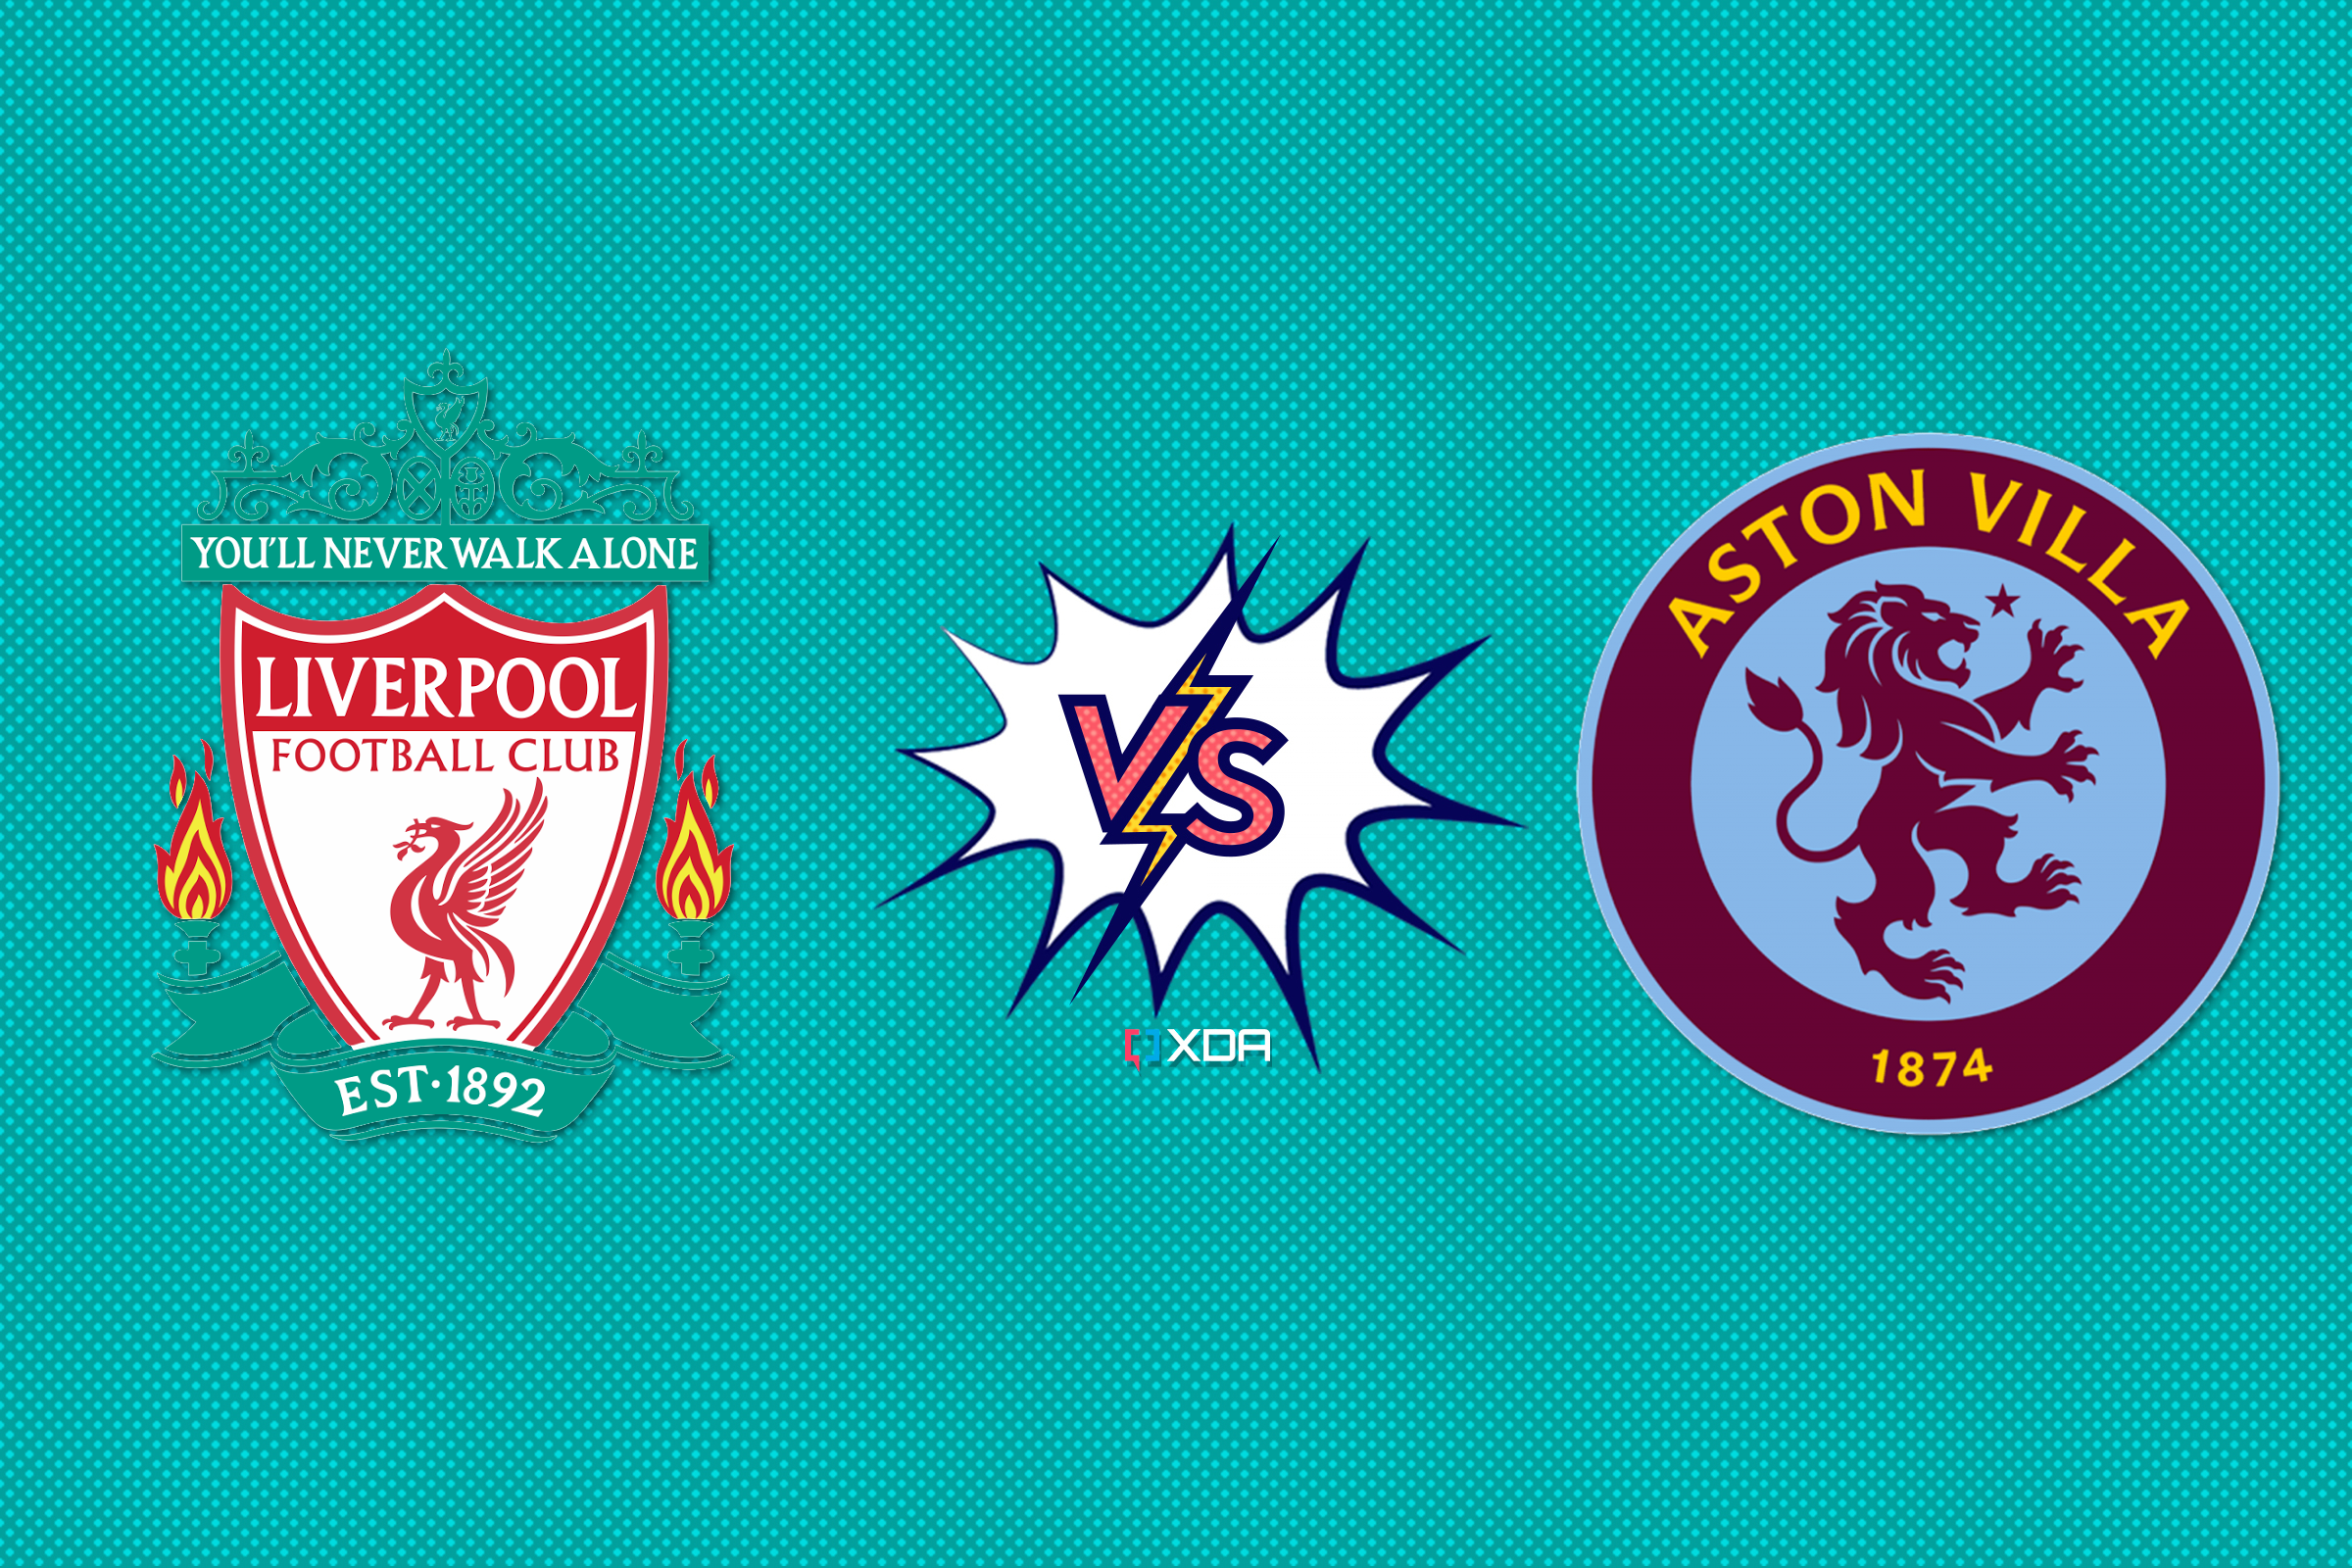 How To Watch Liverpool Vs Aston Villa: Start Time, Live Stream, And More